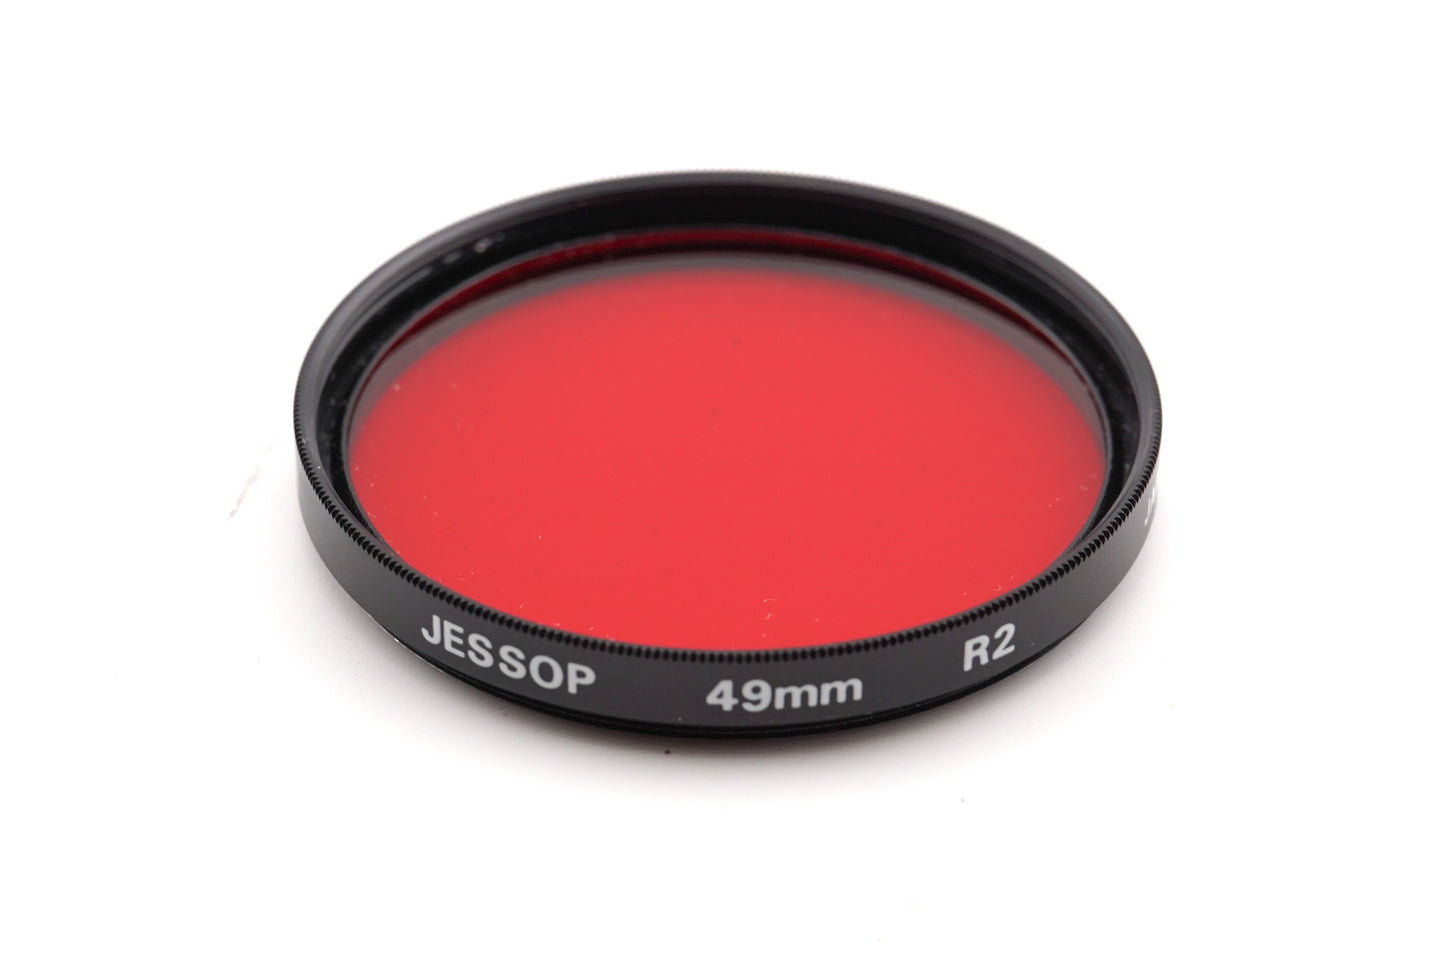 Jessop 49mm Red Filter R2 - Accessory